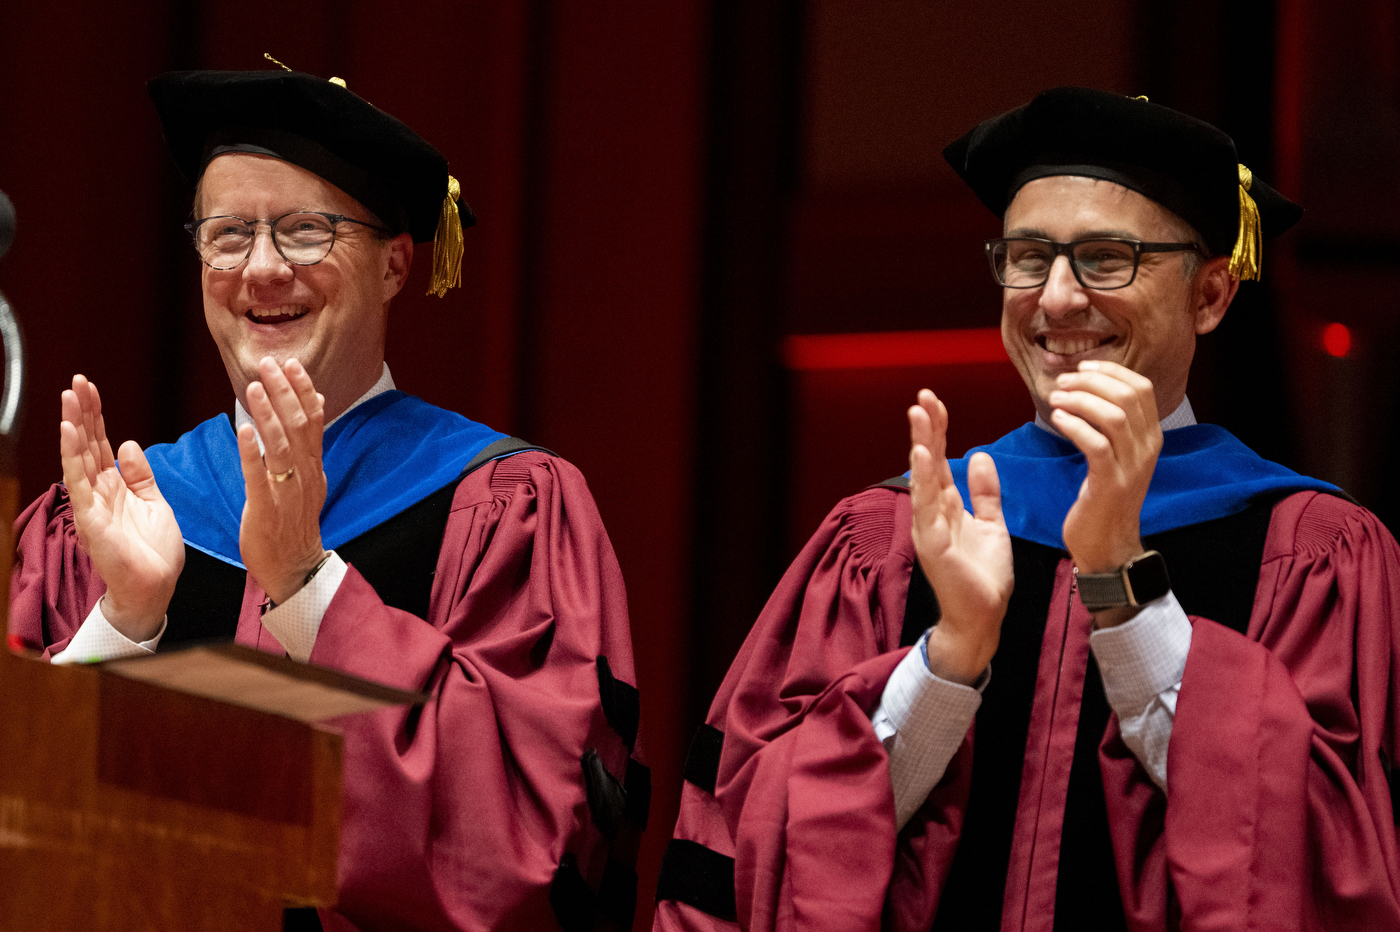 two graduates clapping